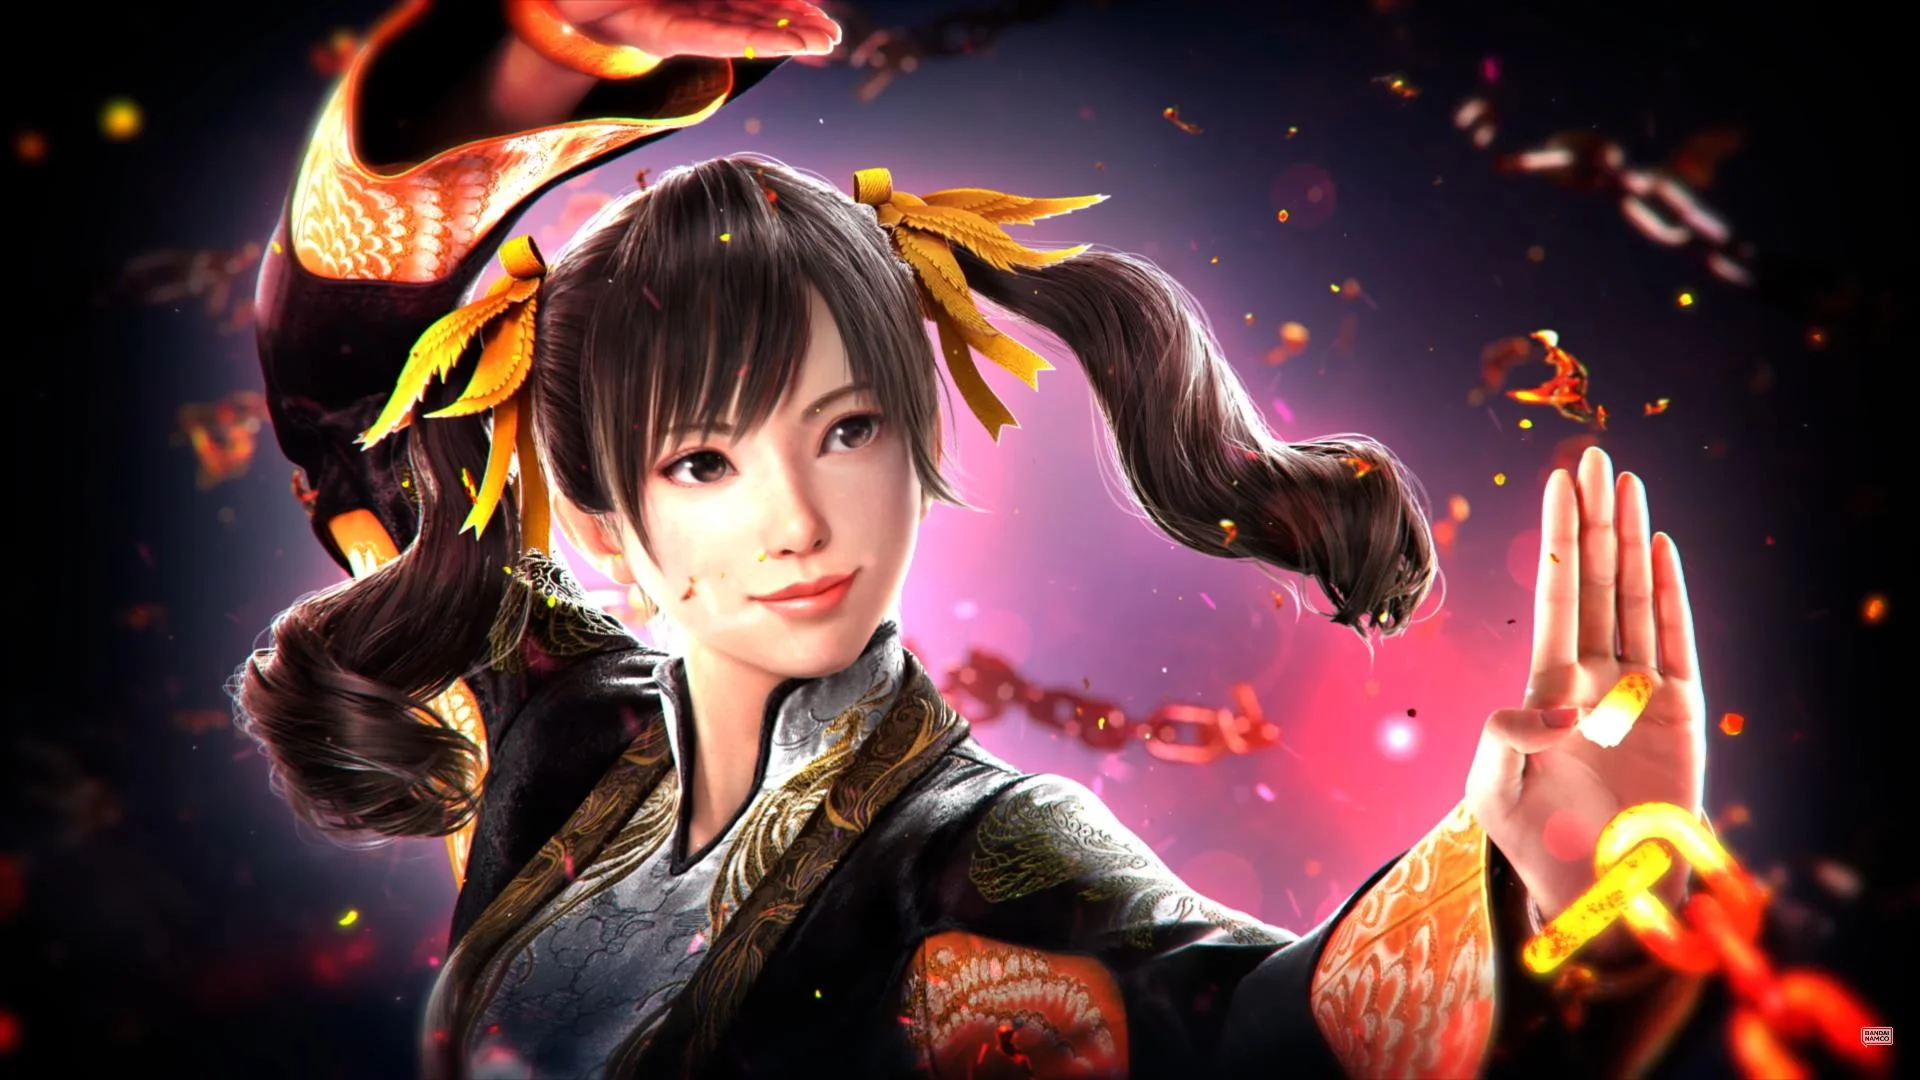 Tekken 8 received a preview and another trailer